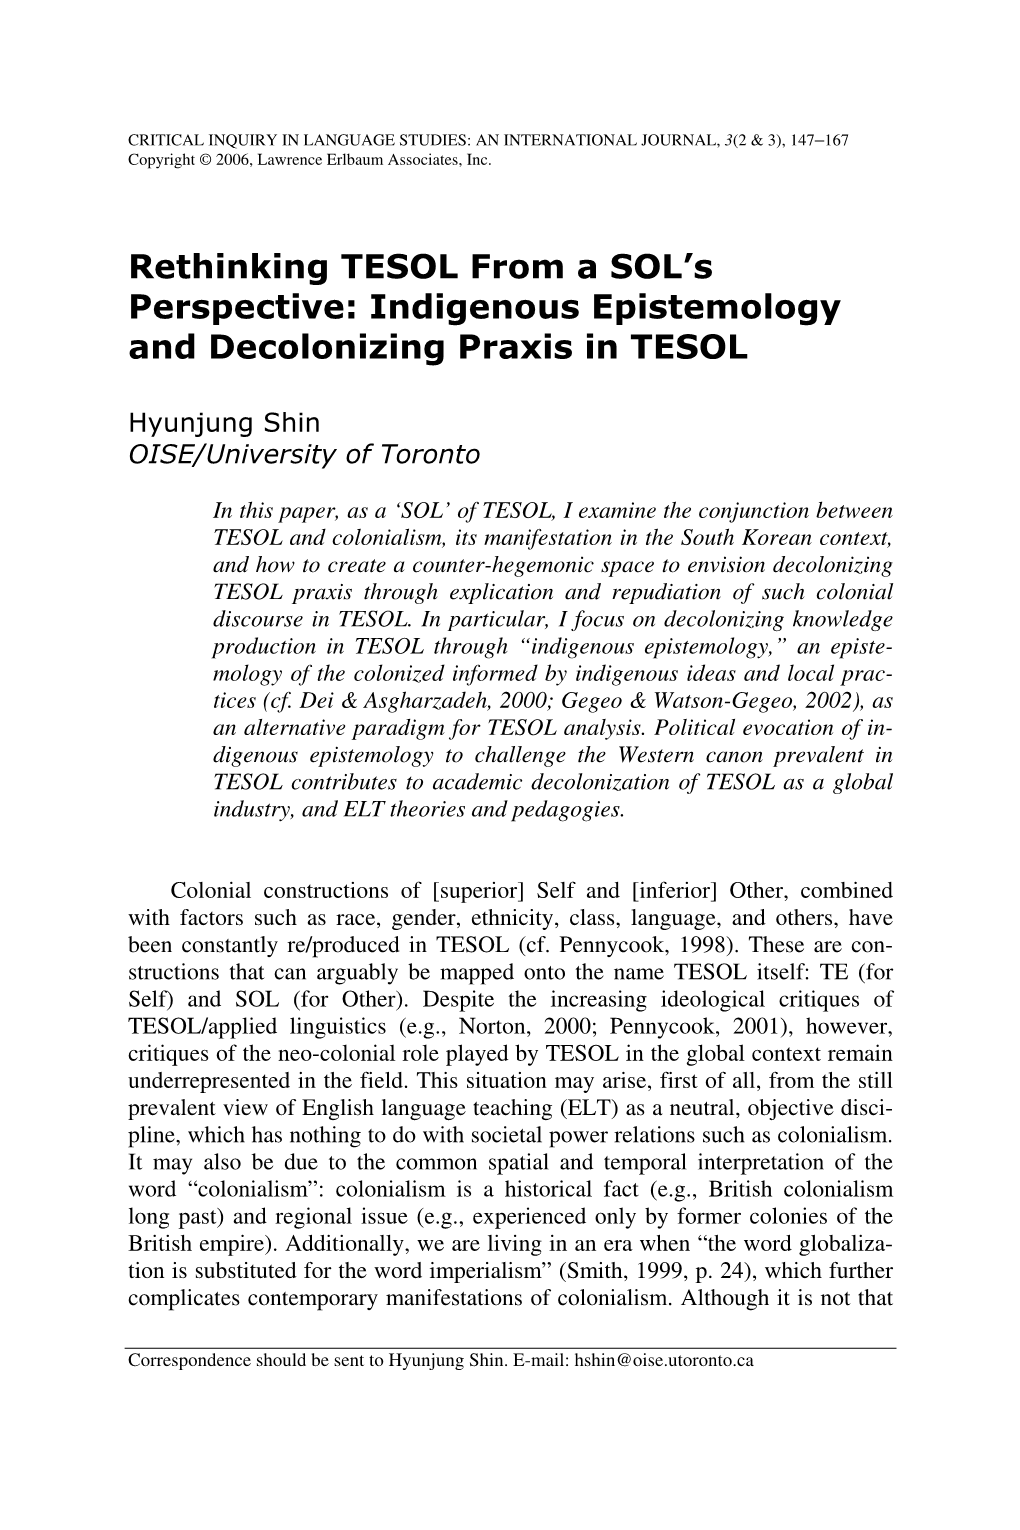 Indigenous Epistemology and Decolonizing Praxis in TESOL